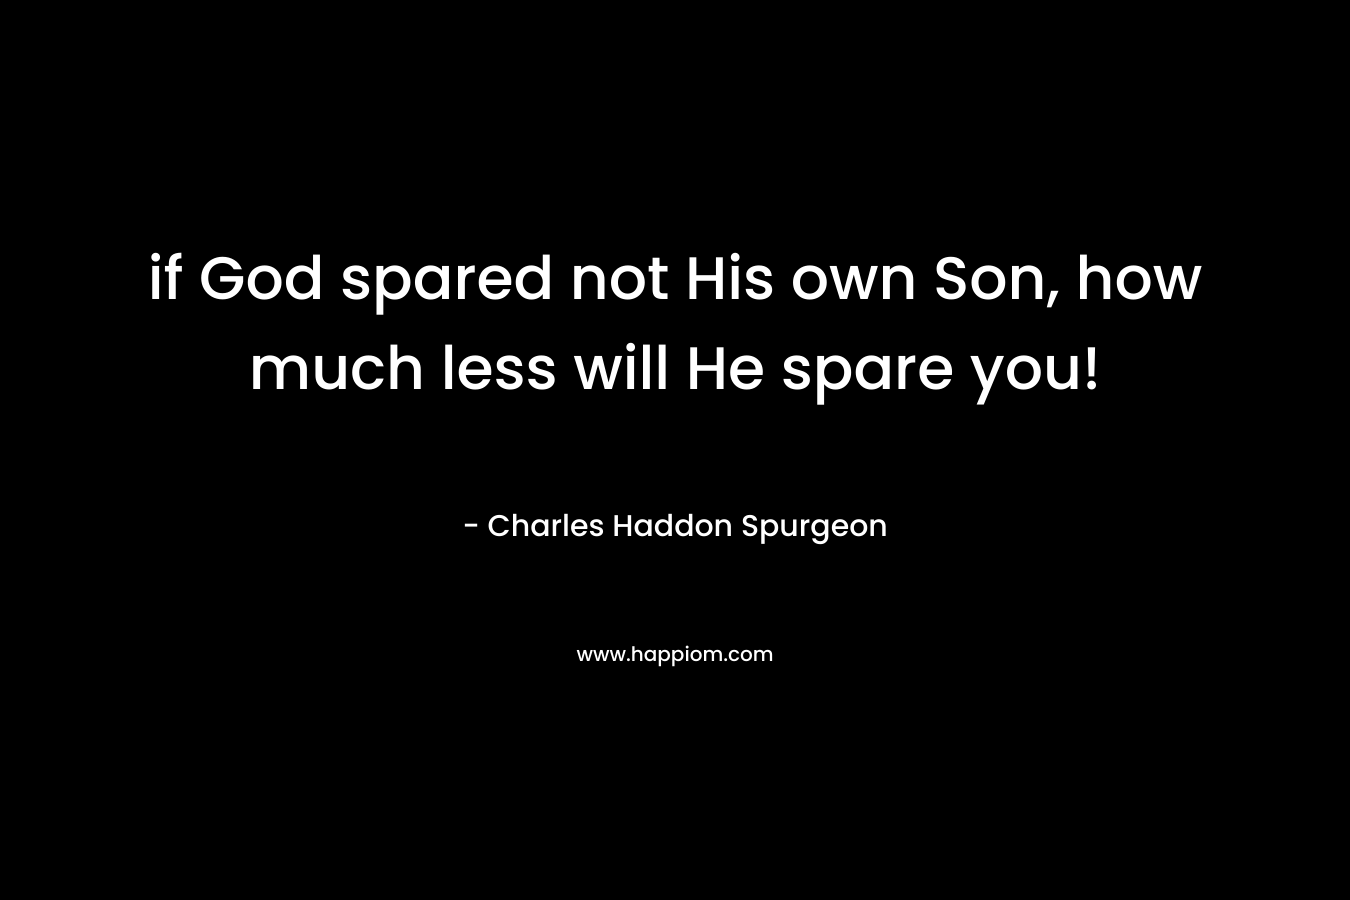 if God spared not His own Son, how much less will He spare you!